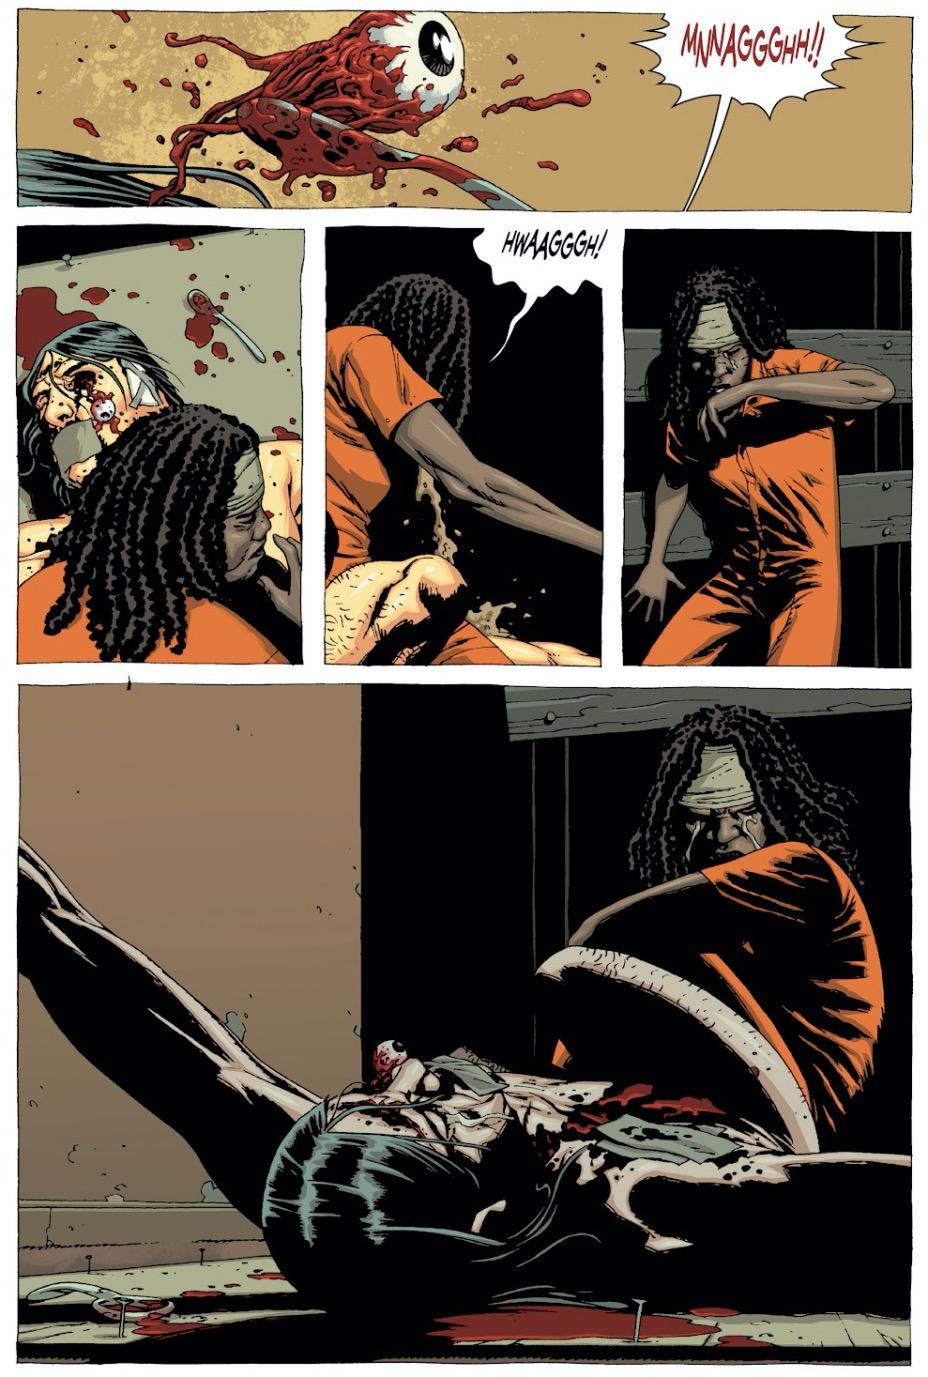 The Walking Dead Artist Refused to Draw Controversial Comic Book Issue